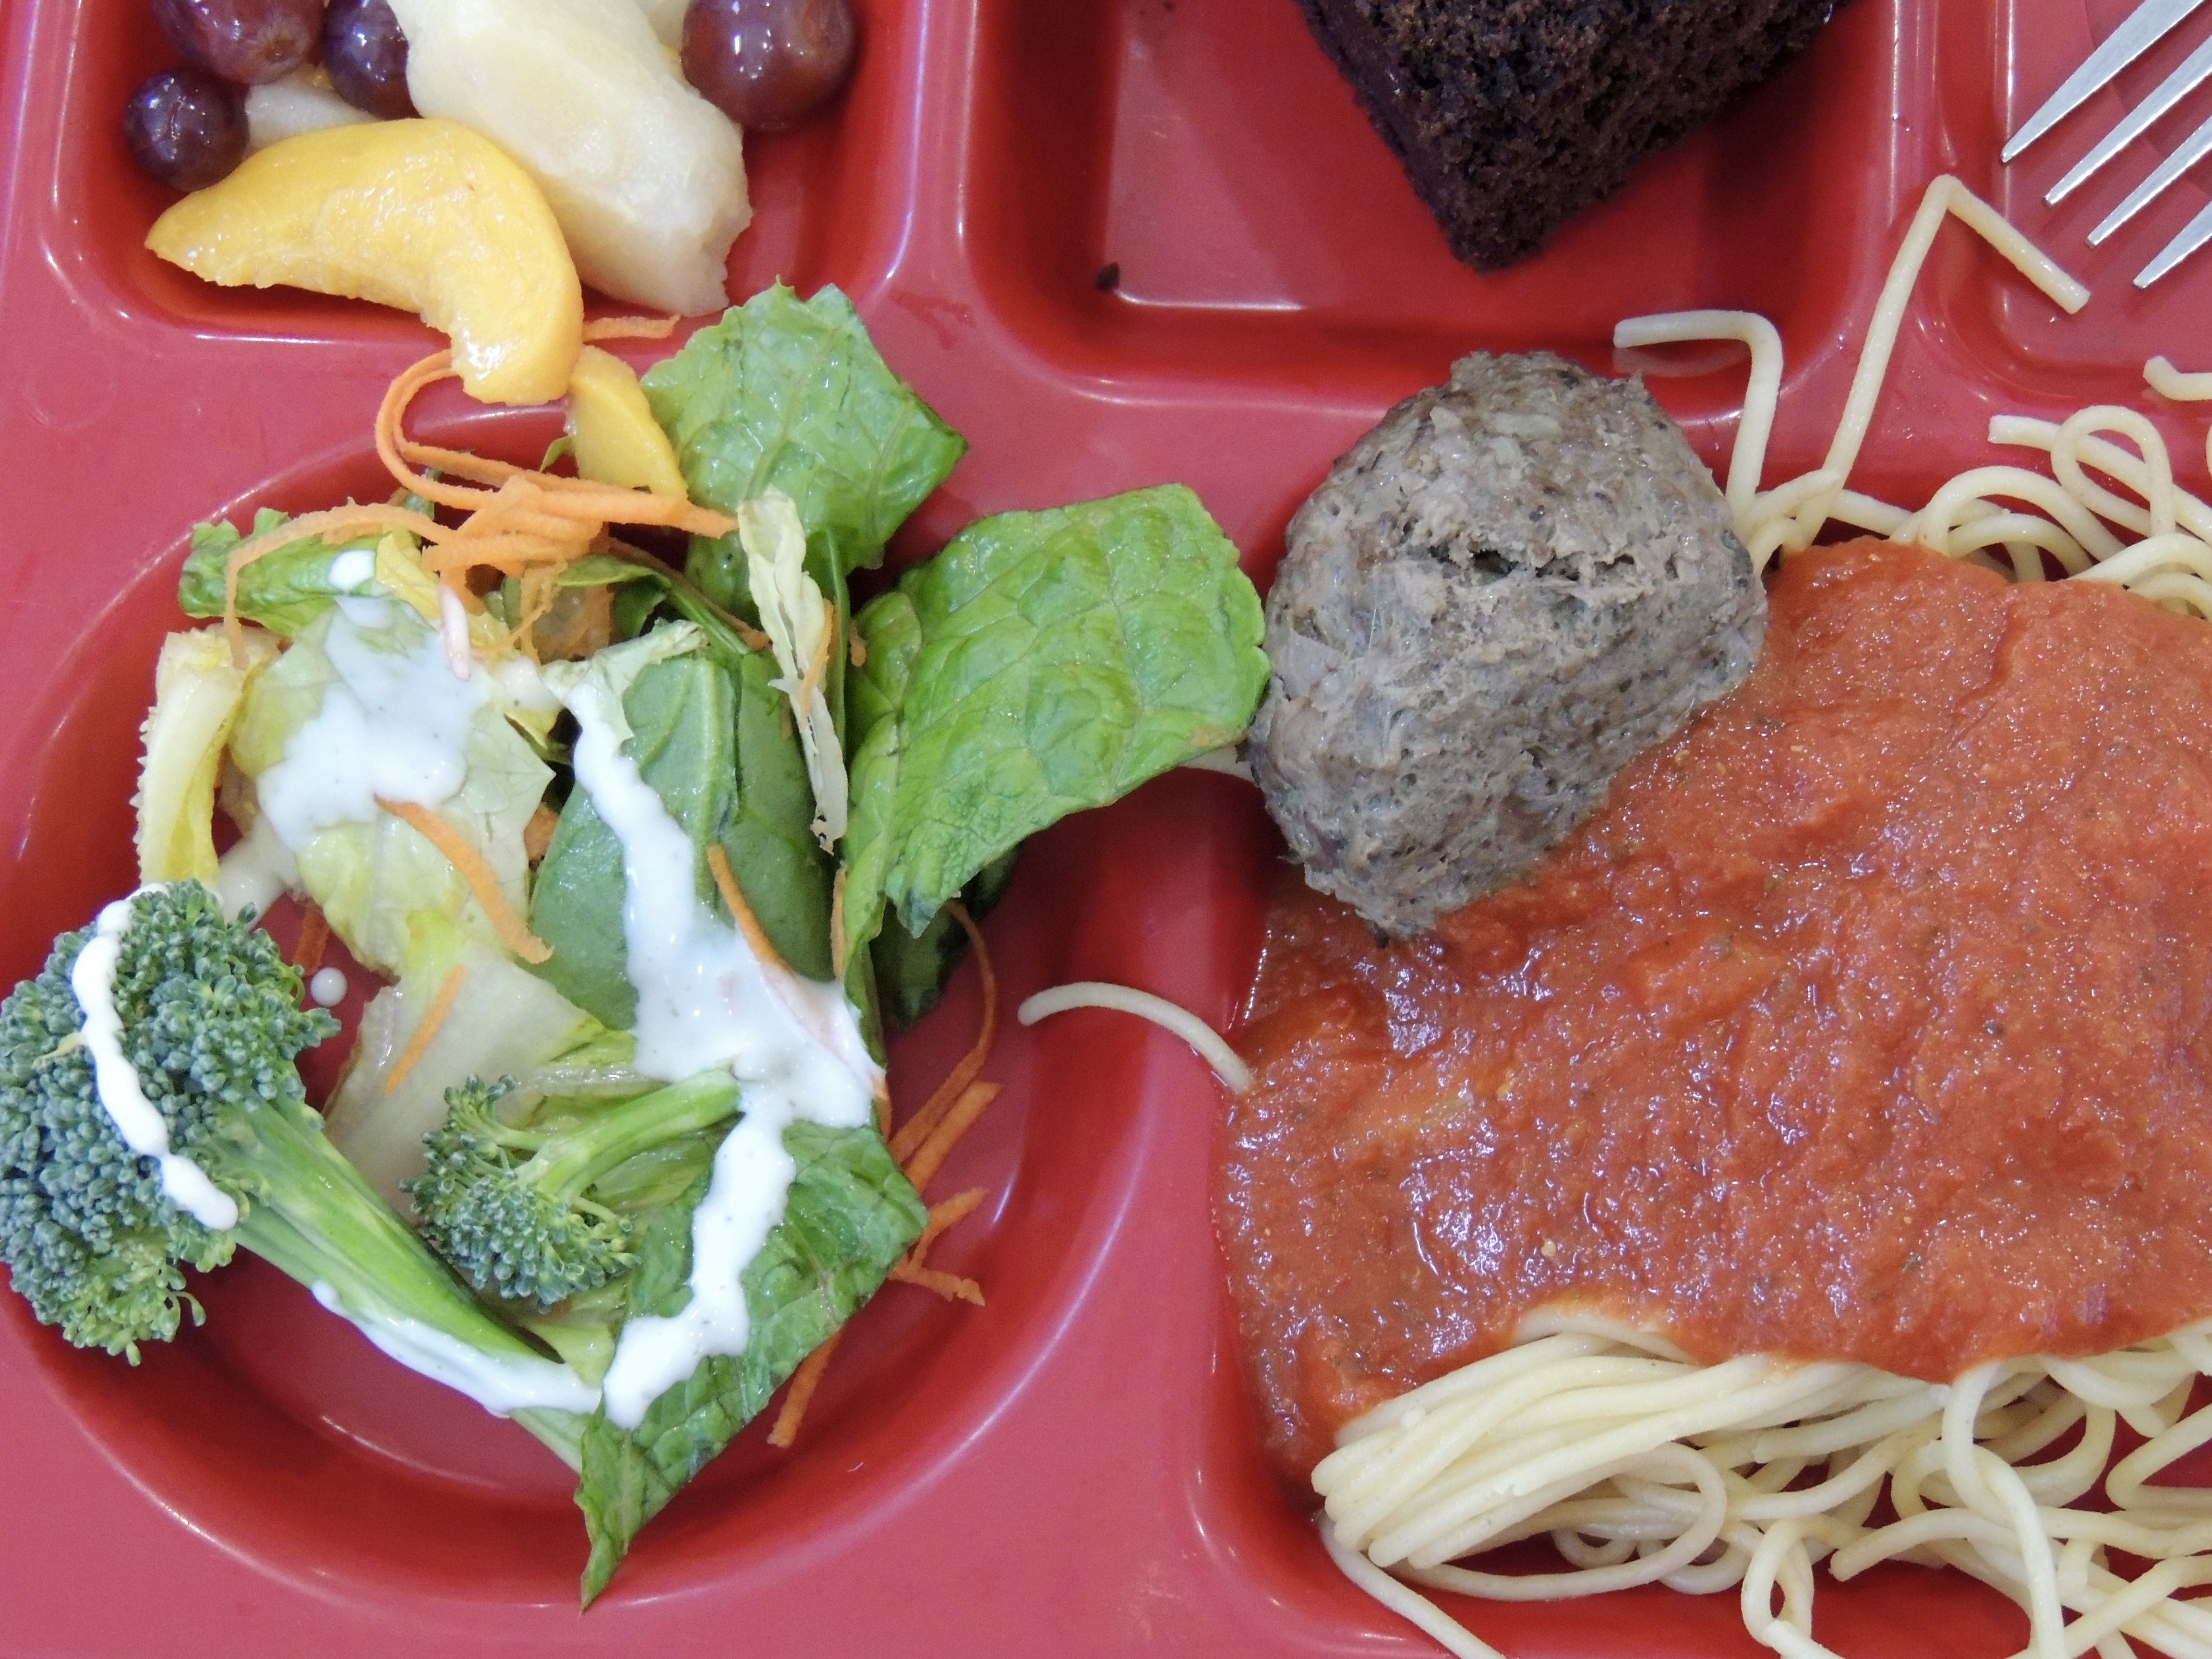 Example of a school cafeteria meal involving beef